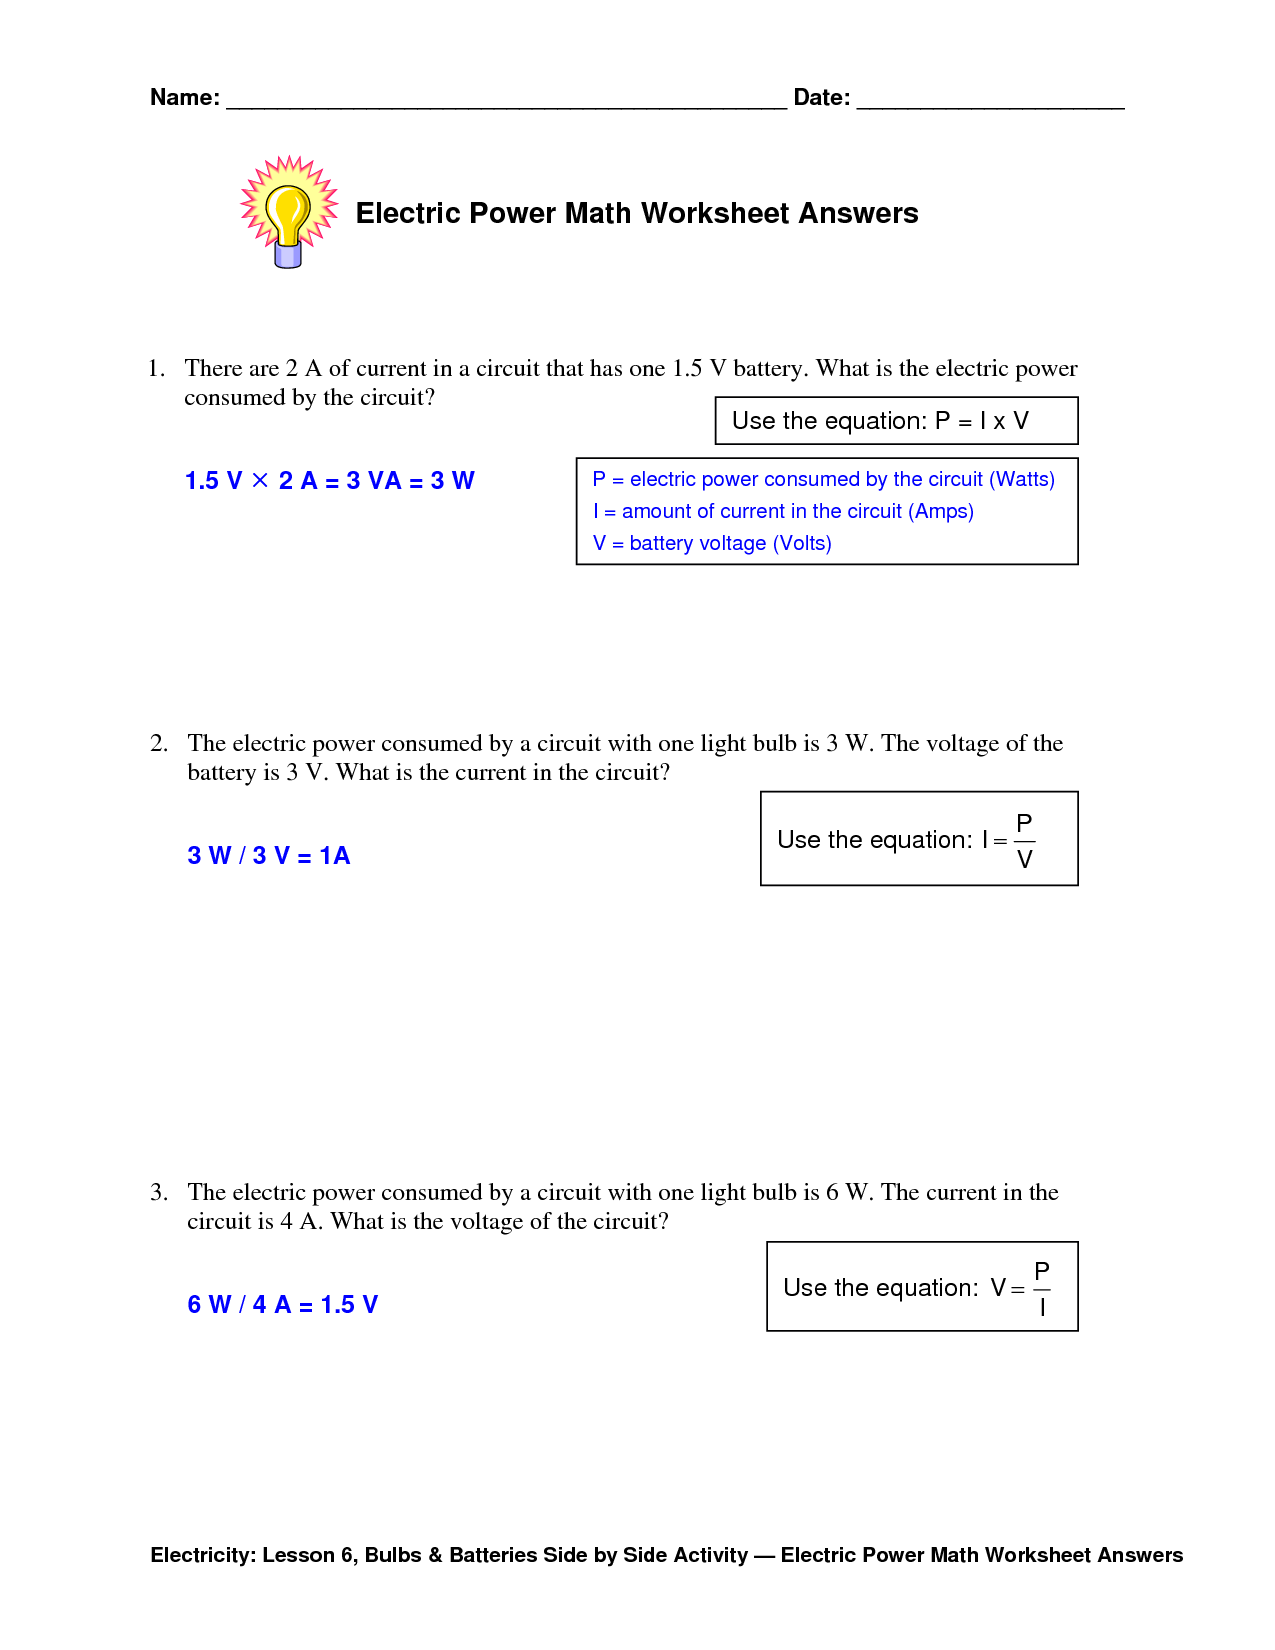 14-best-images-of-electronic-math-worksheets-science-electricity-worksheets-4th-grade